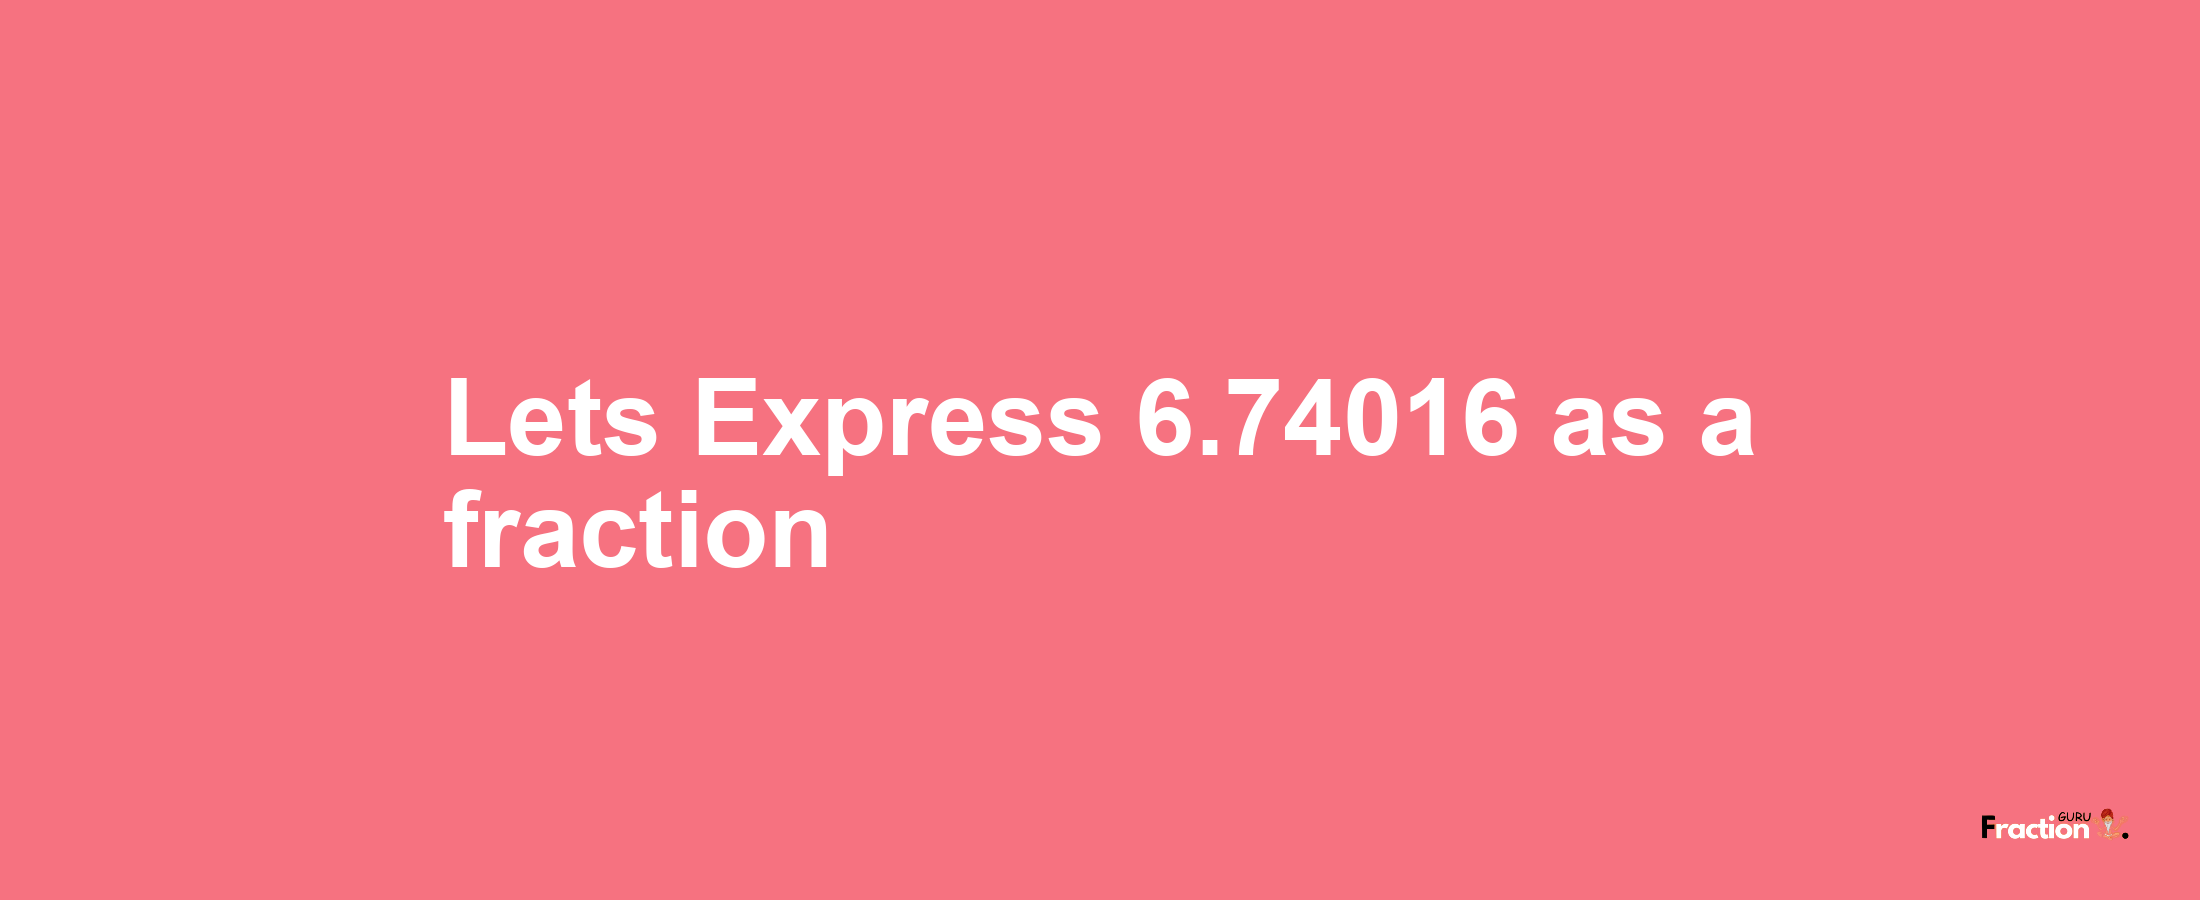 Lets Express 6.74016 as afraction